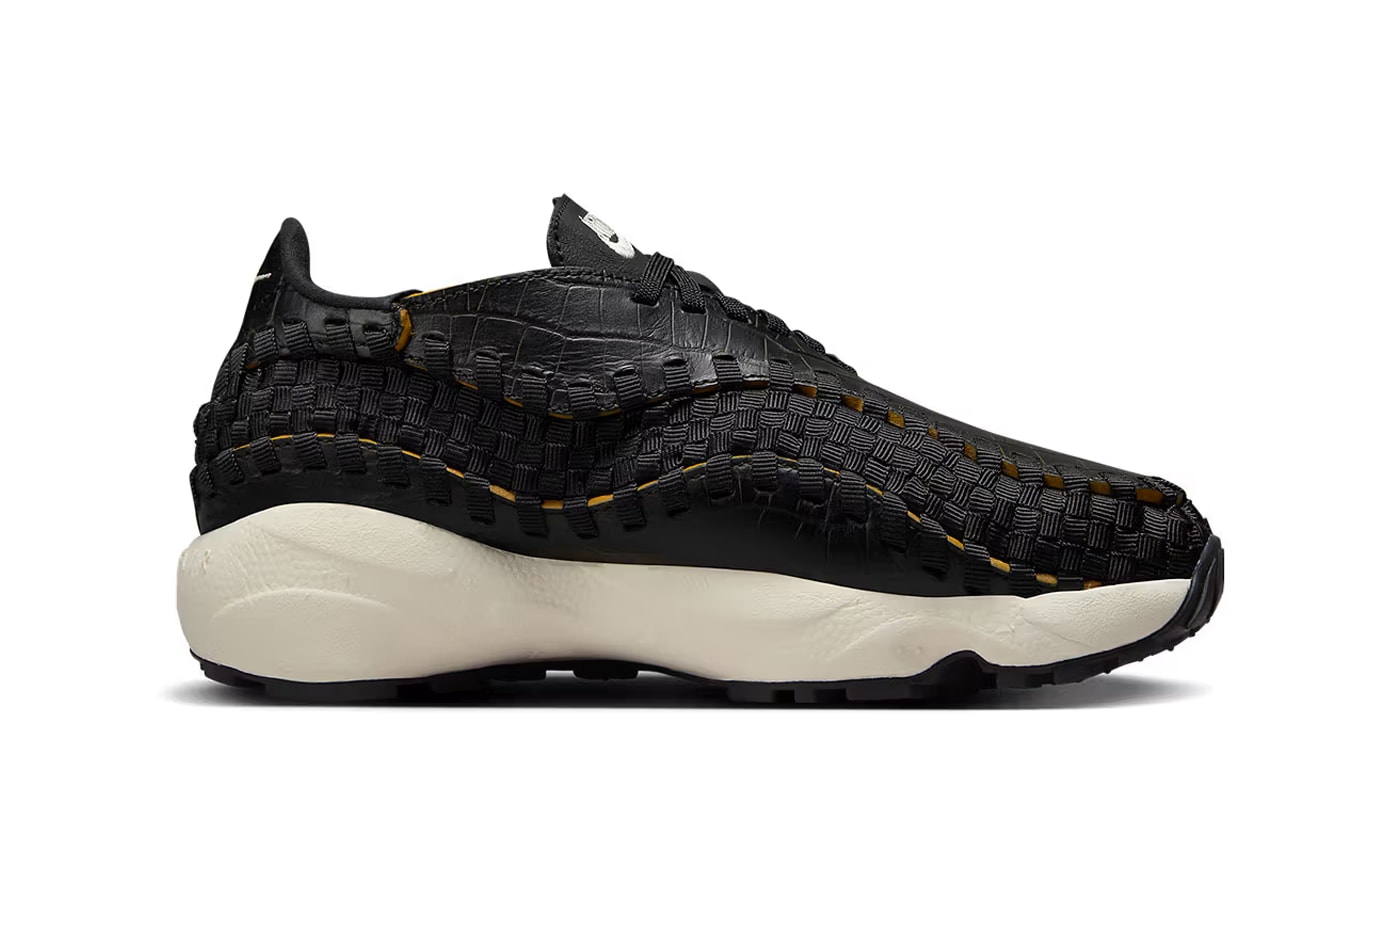 nike air footscape woven black croc FQ8129 010 release date info store list buying guide photos price 